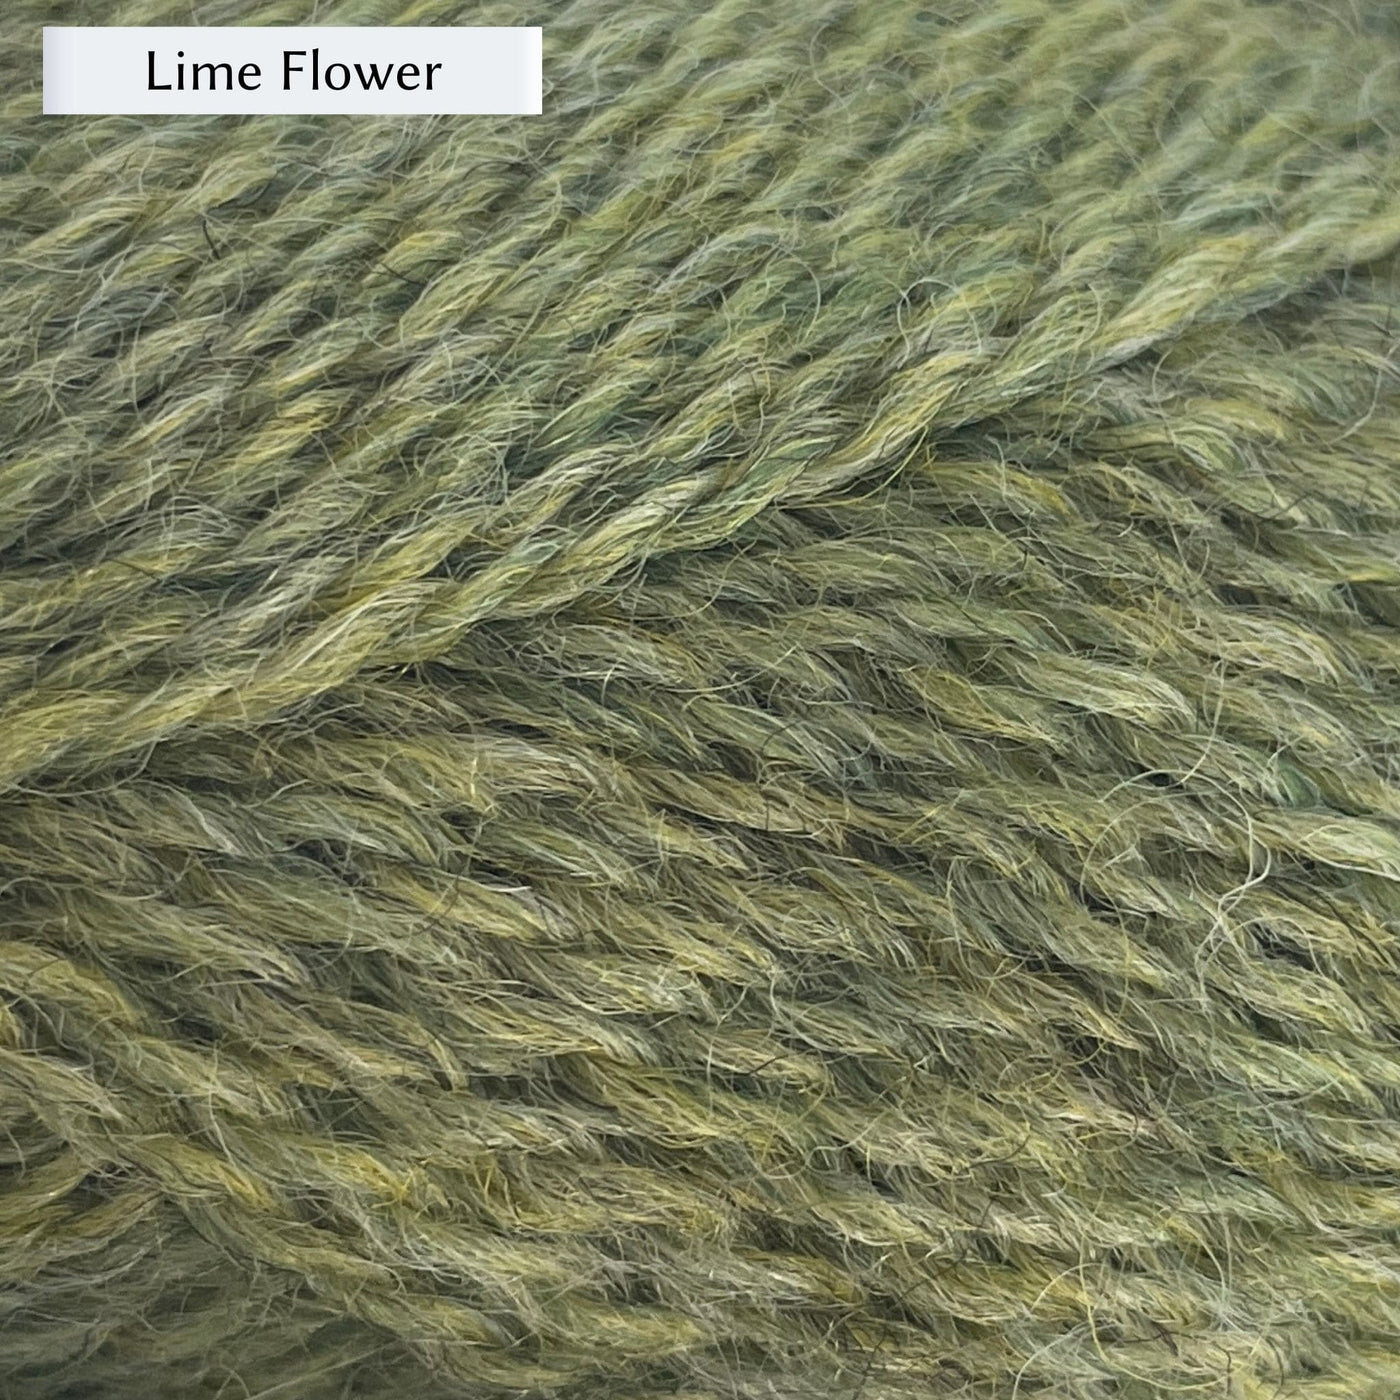 Marie Wallin's British Breeds yarn, a fingering weight, in color Lime Flower, a light yellow-green